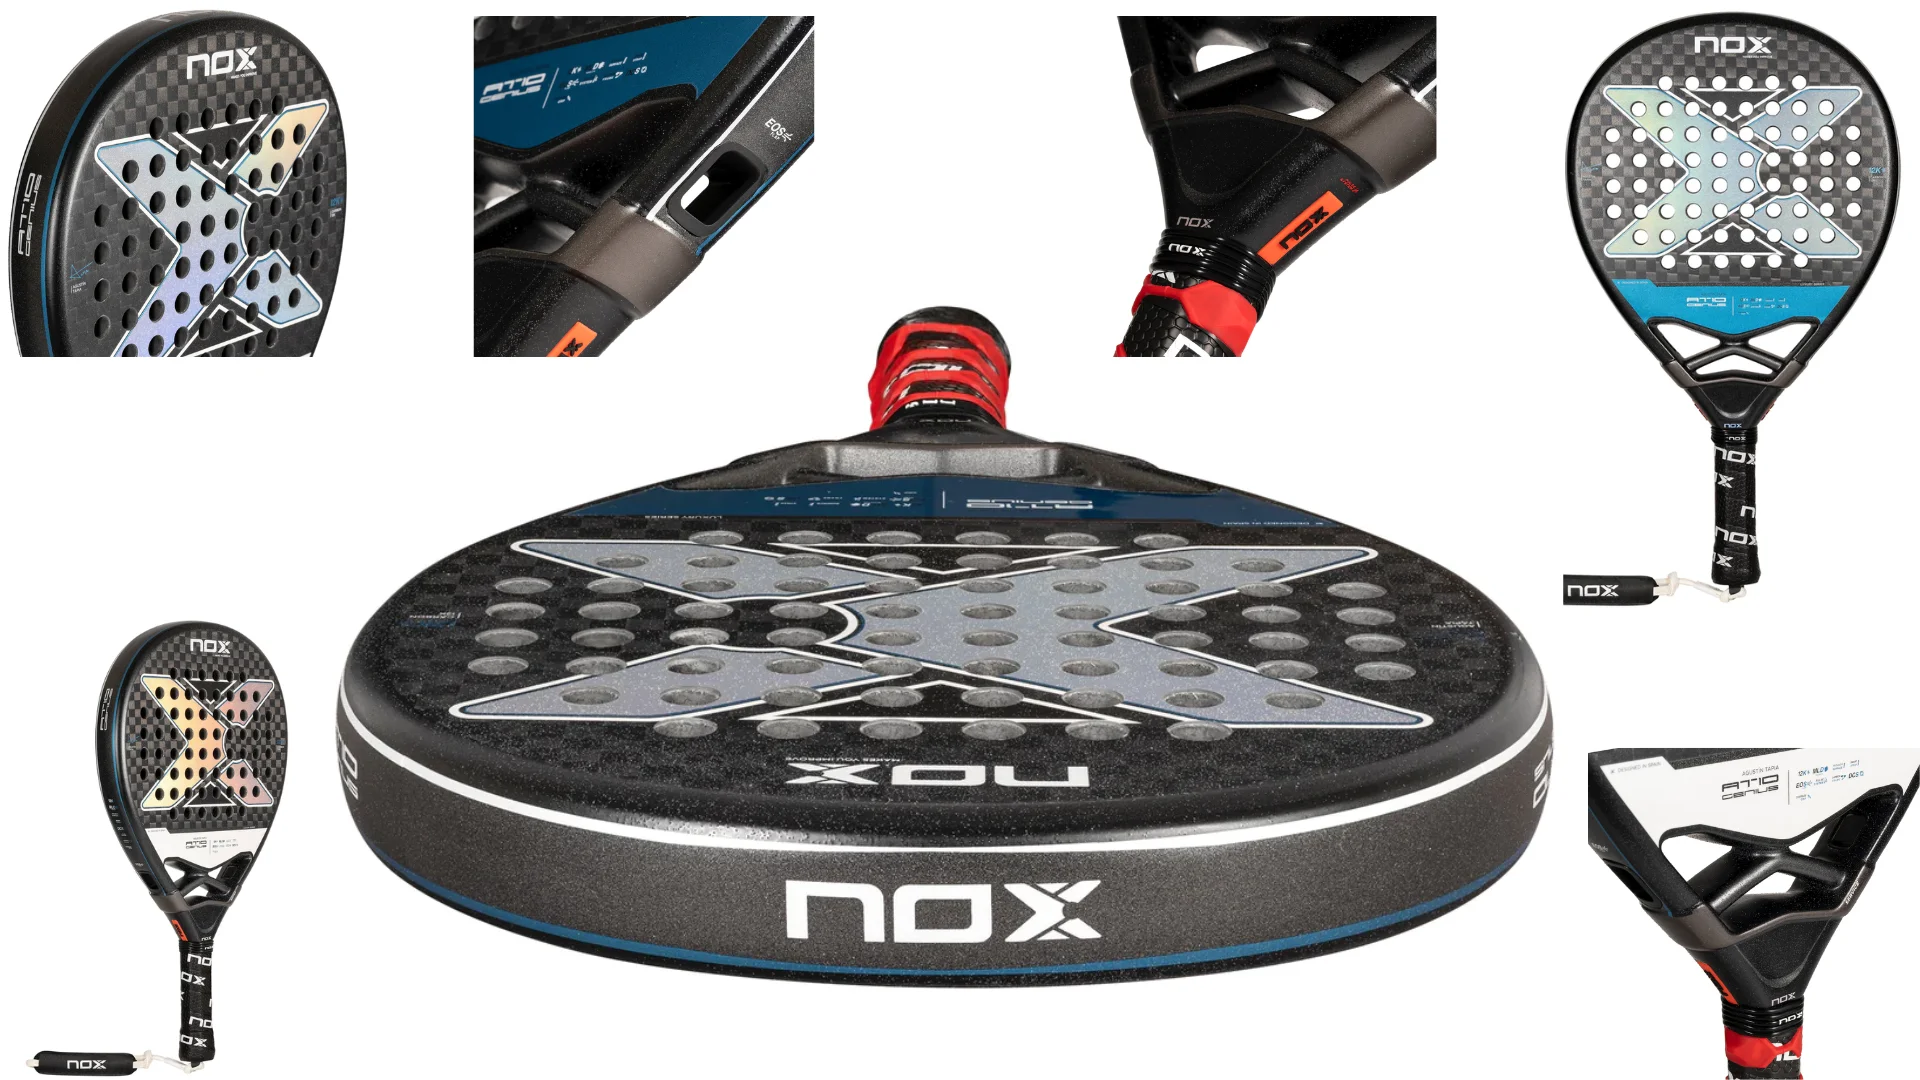 The Nox AT10 12K analyzed by Stéphane Penso!